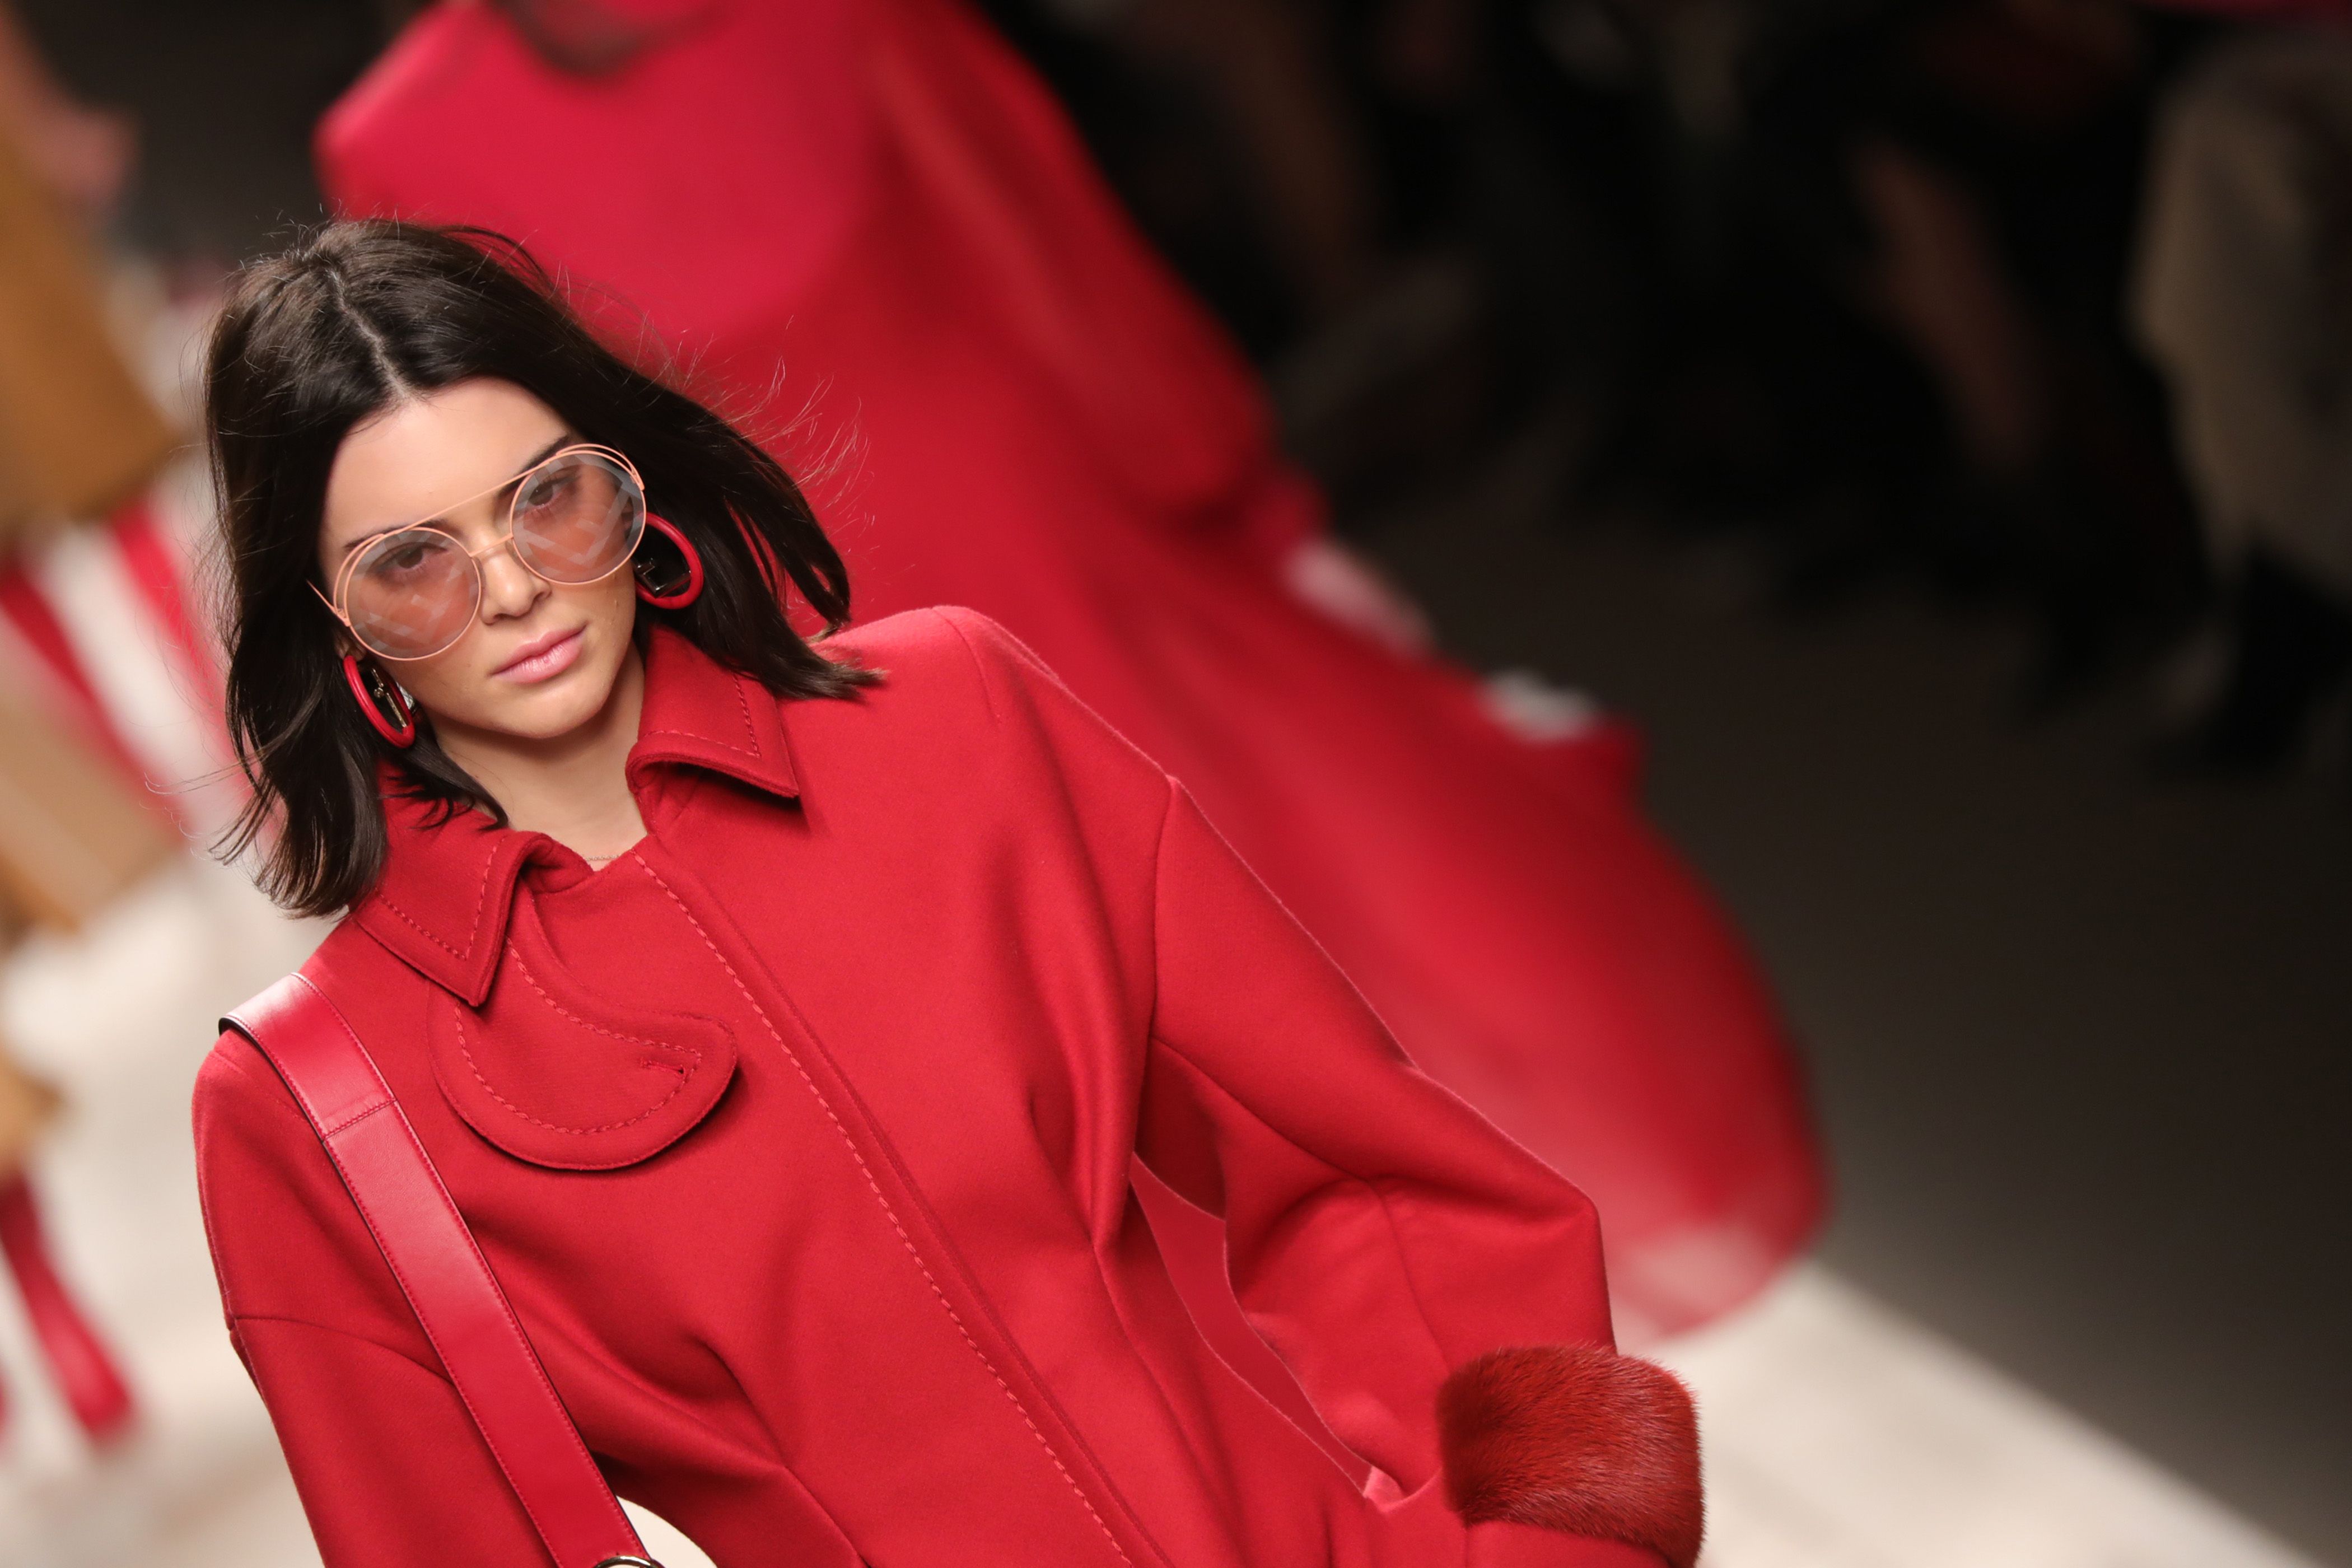 Trend to try: Wearing red all year round